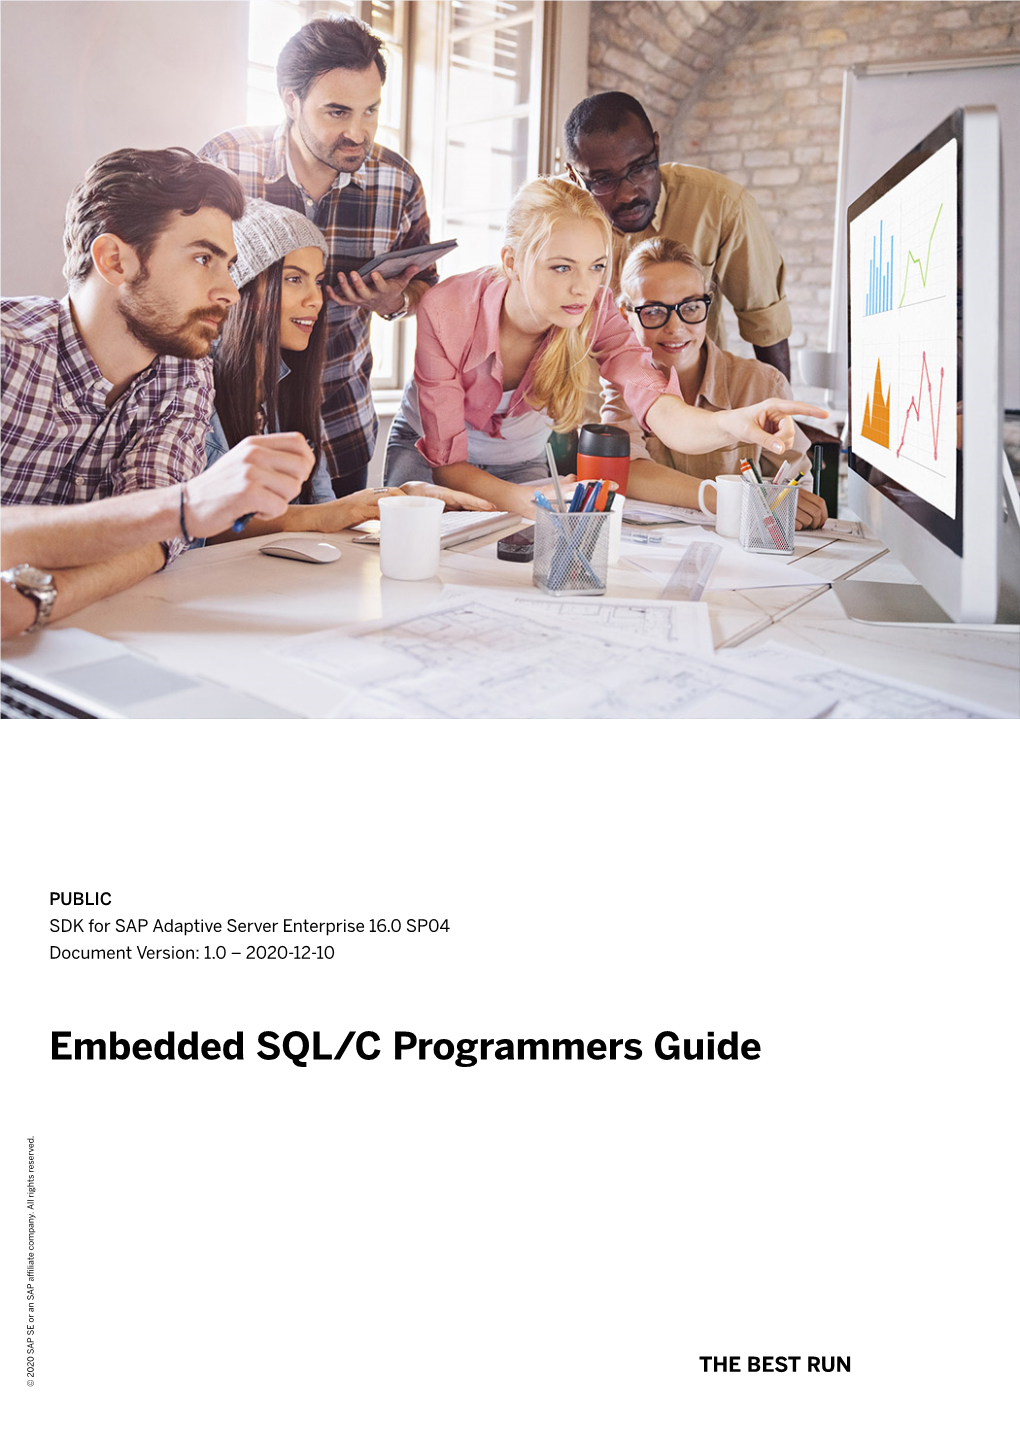 Embedded SQL/C Programmers Guide Company